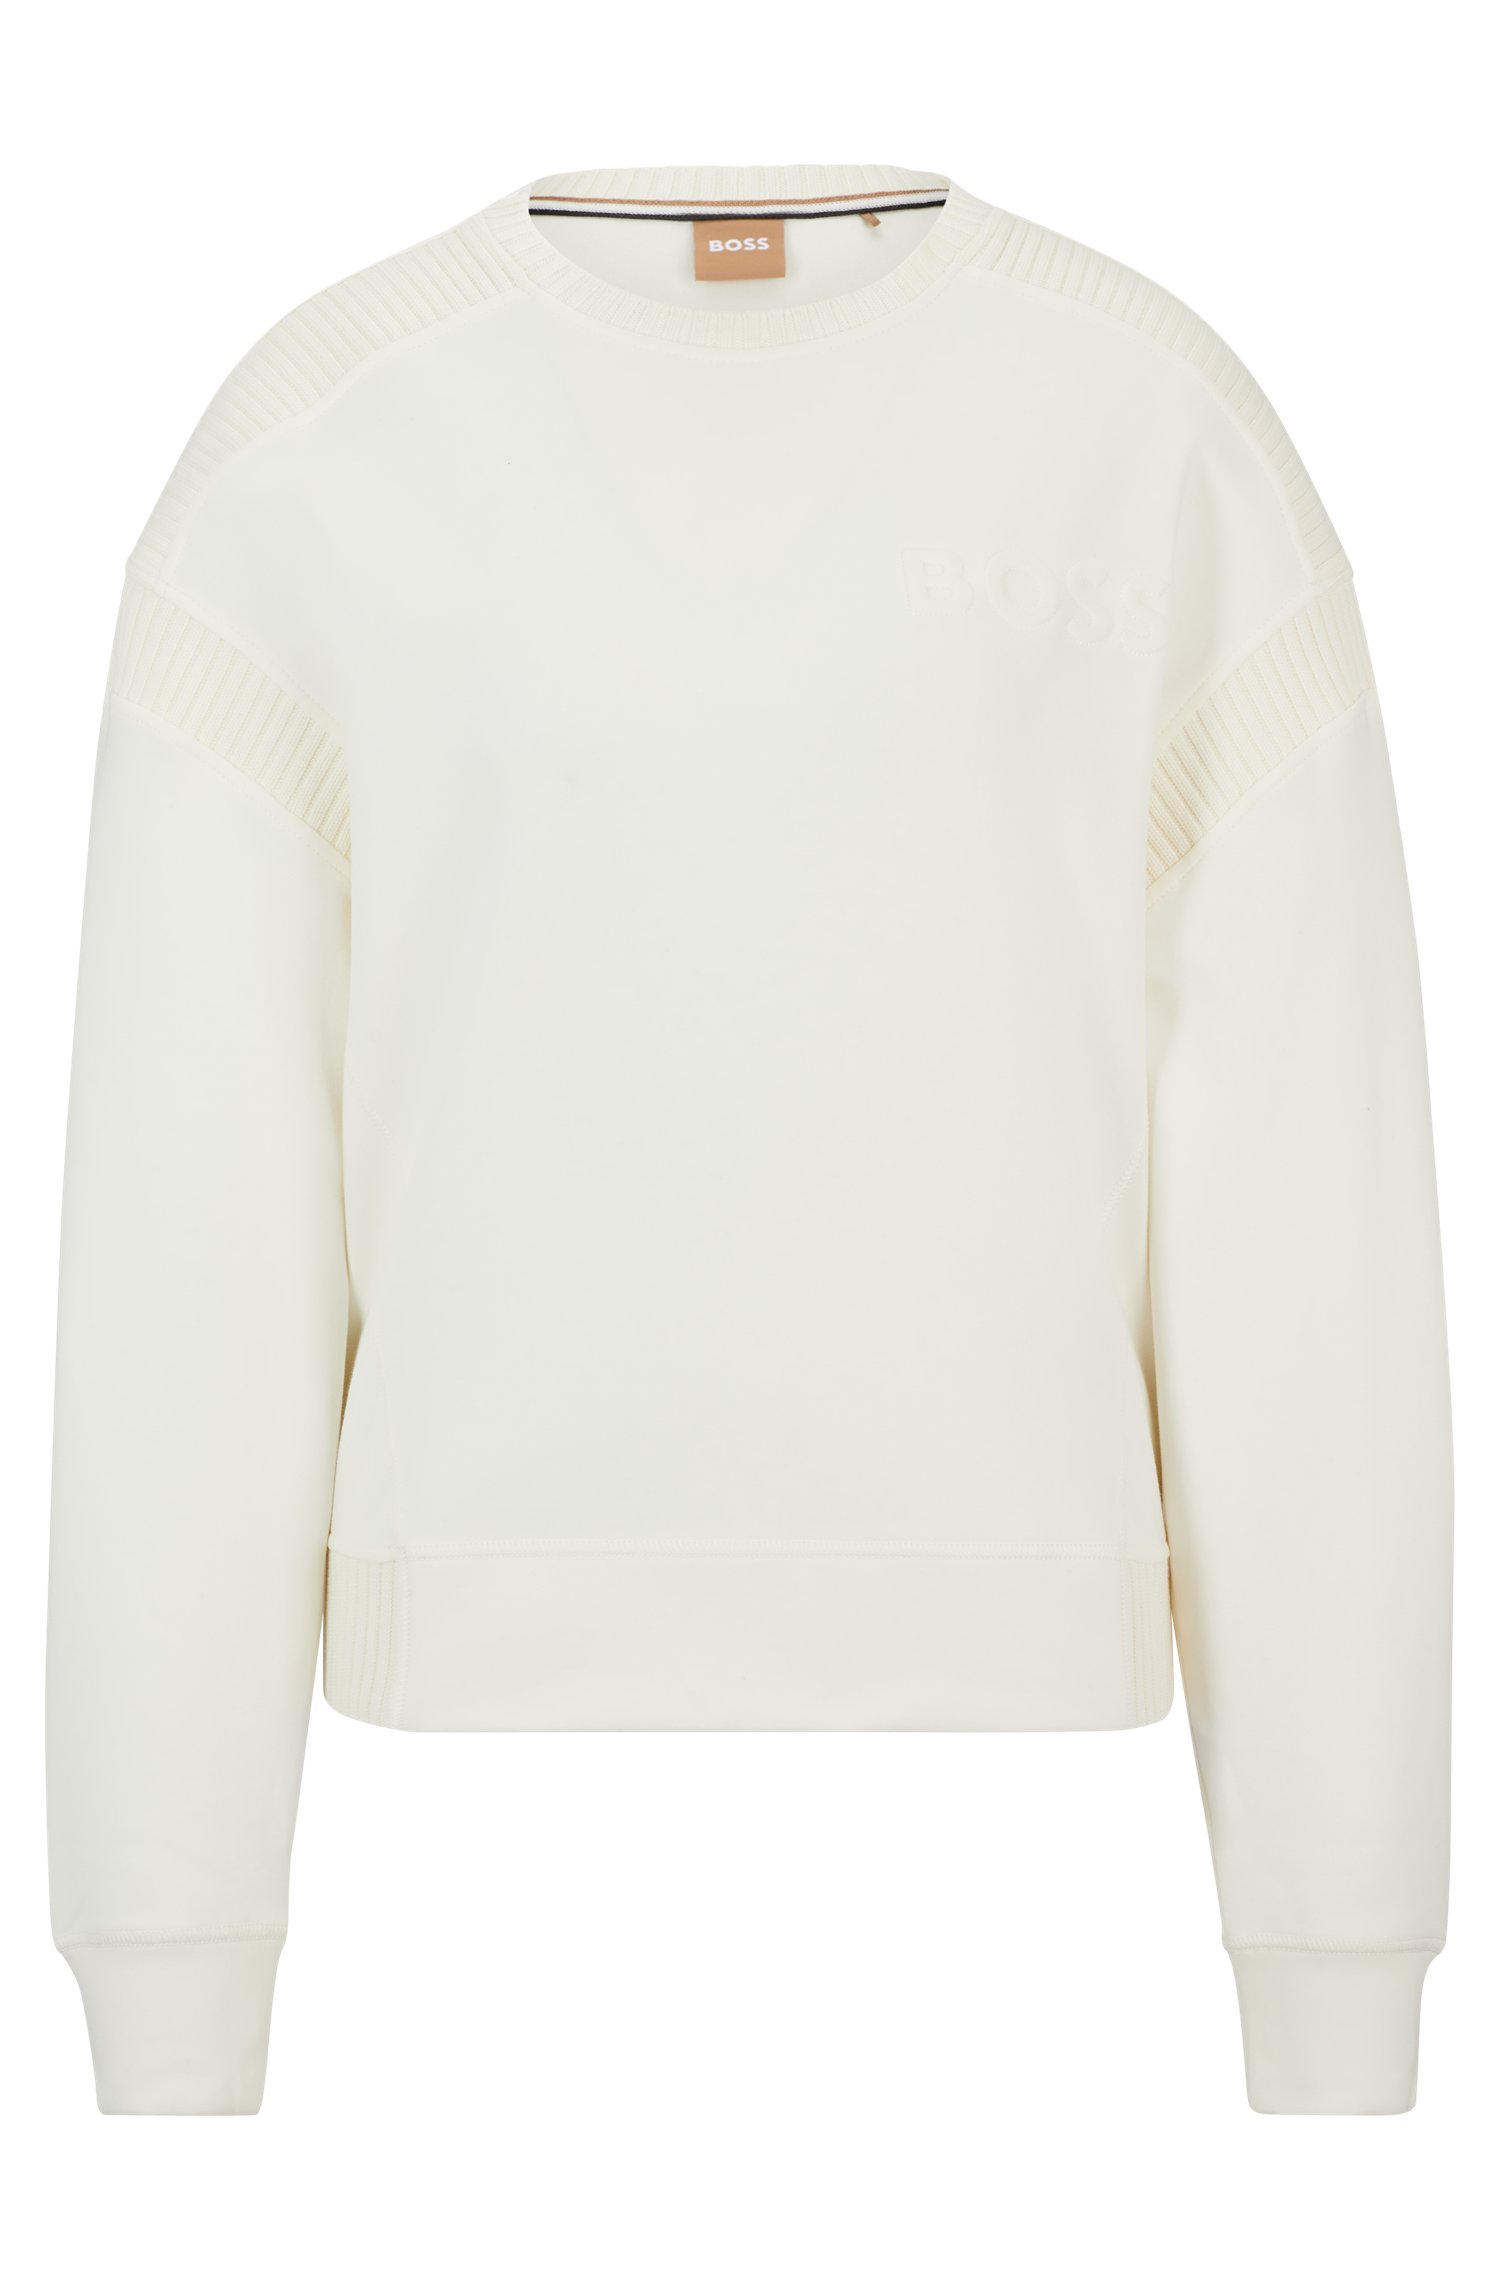 Sweatshirt with embossed logo and knitted tape